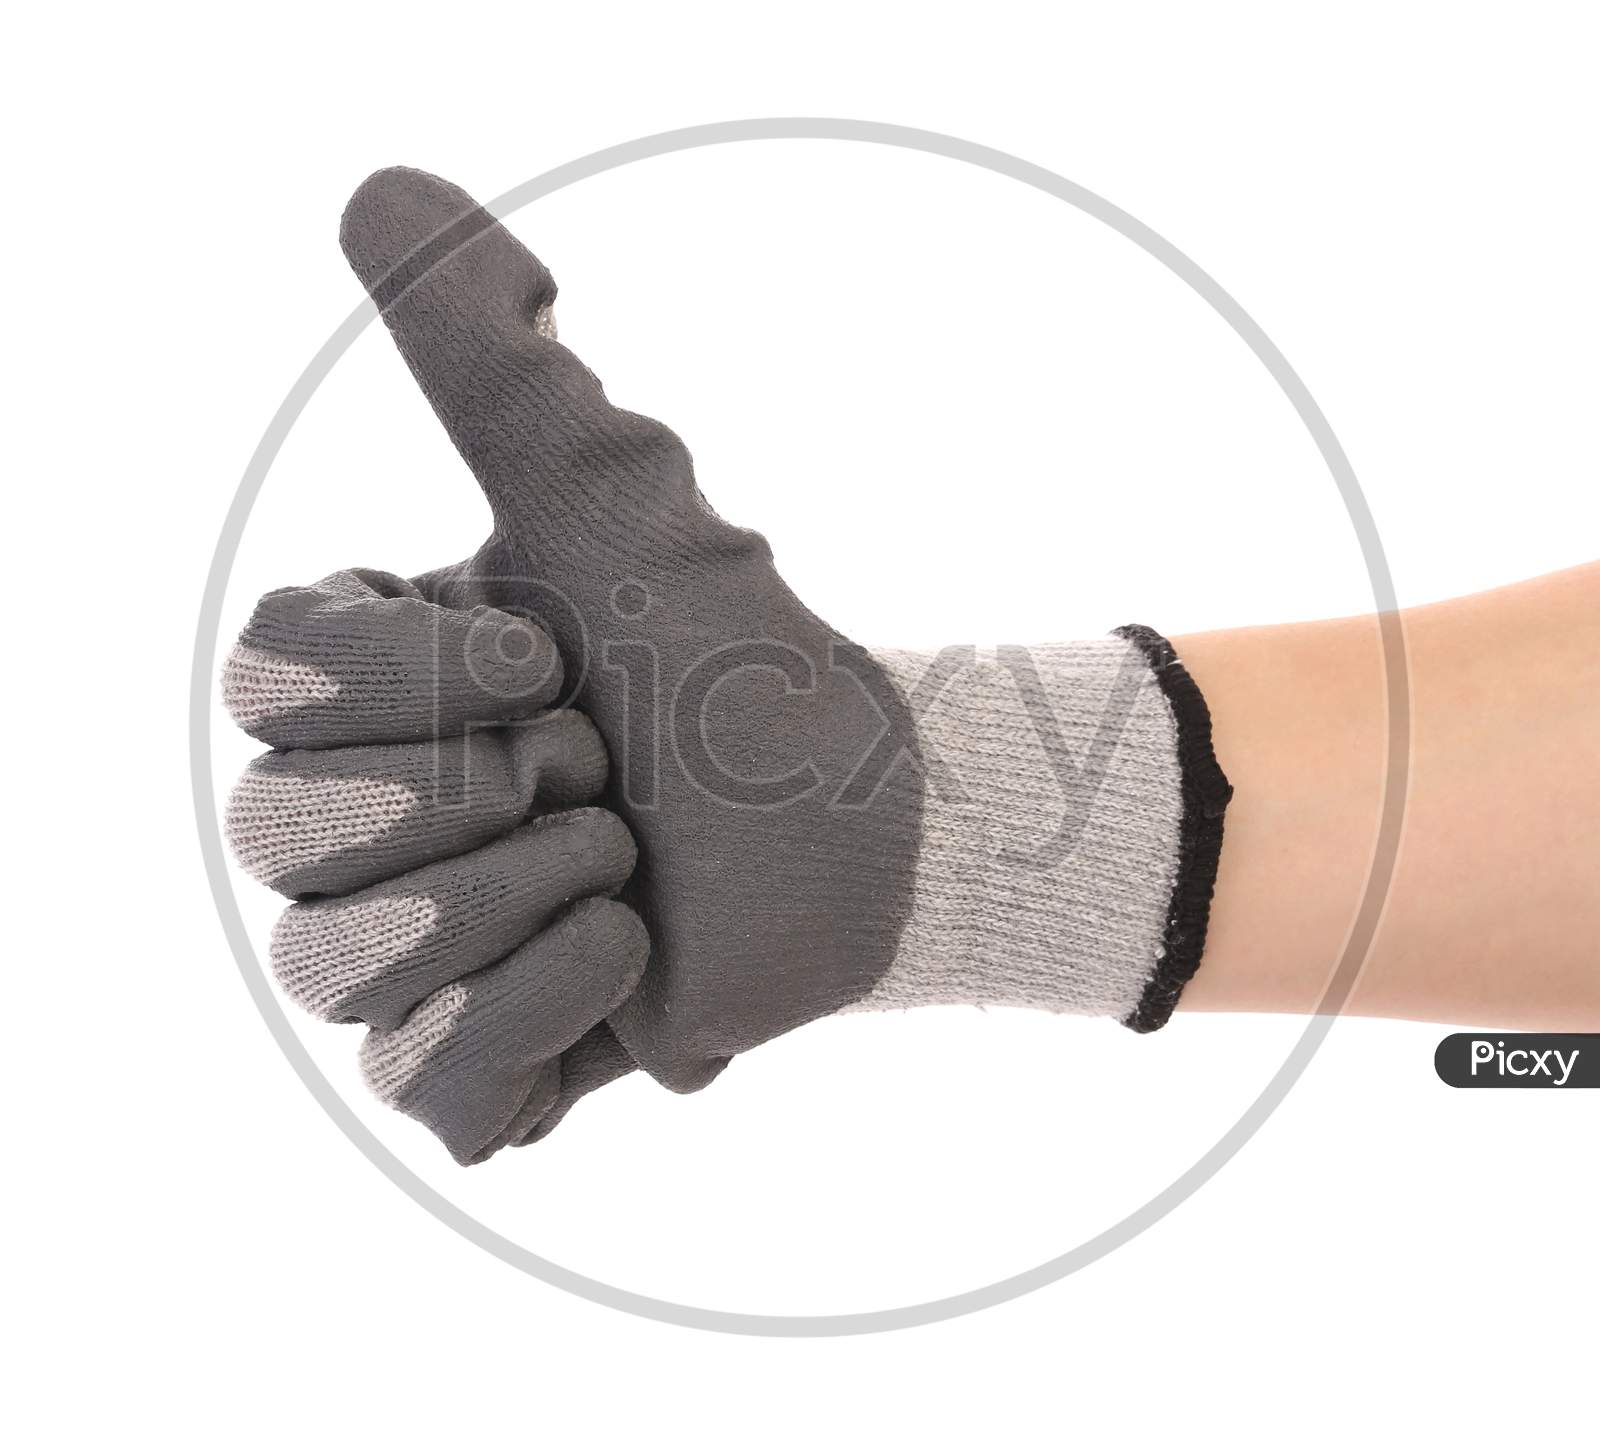 Hand In Glove With Thumbs Up. Isolated On A White Background.